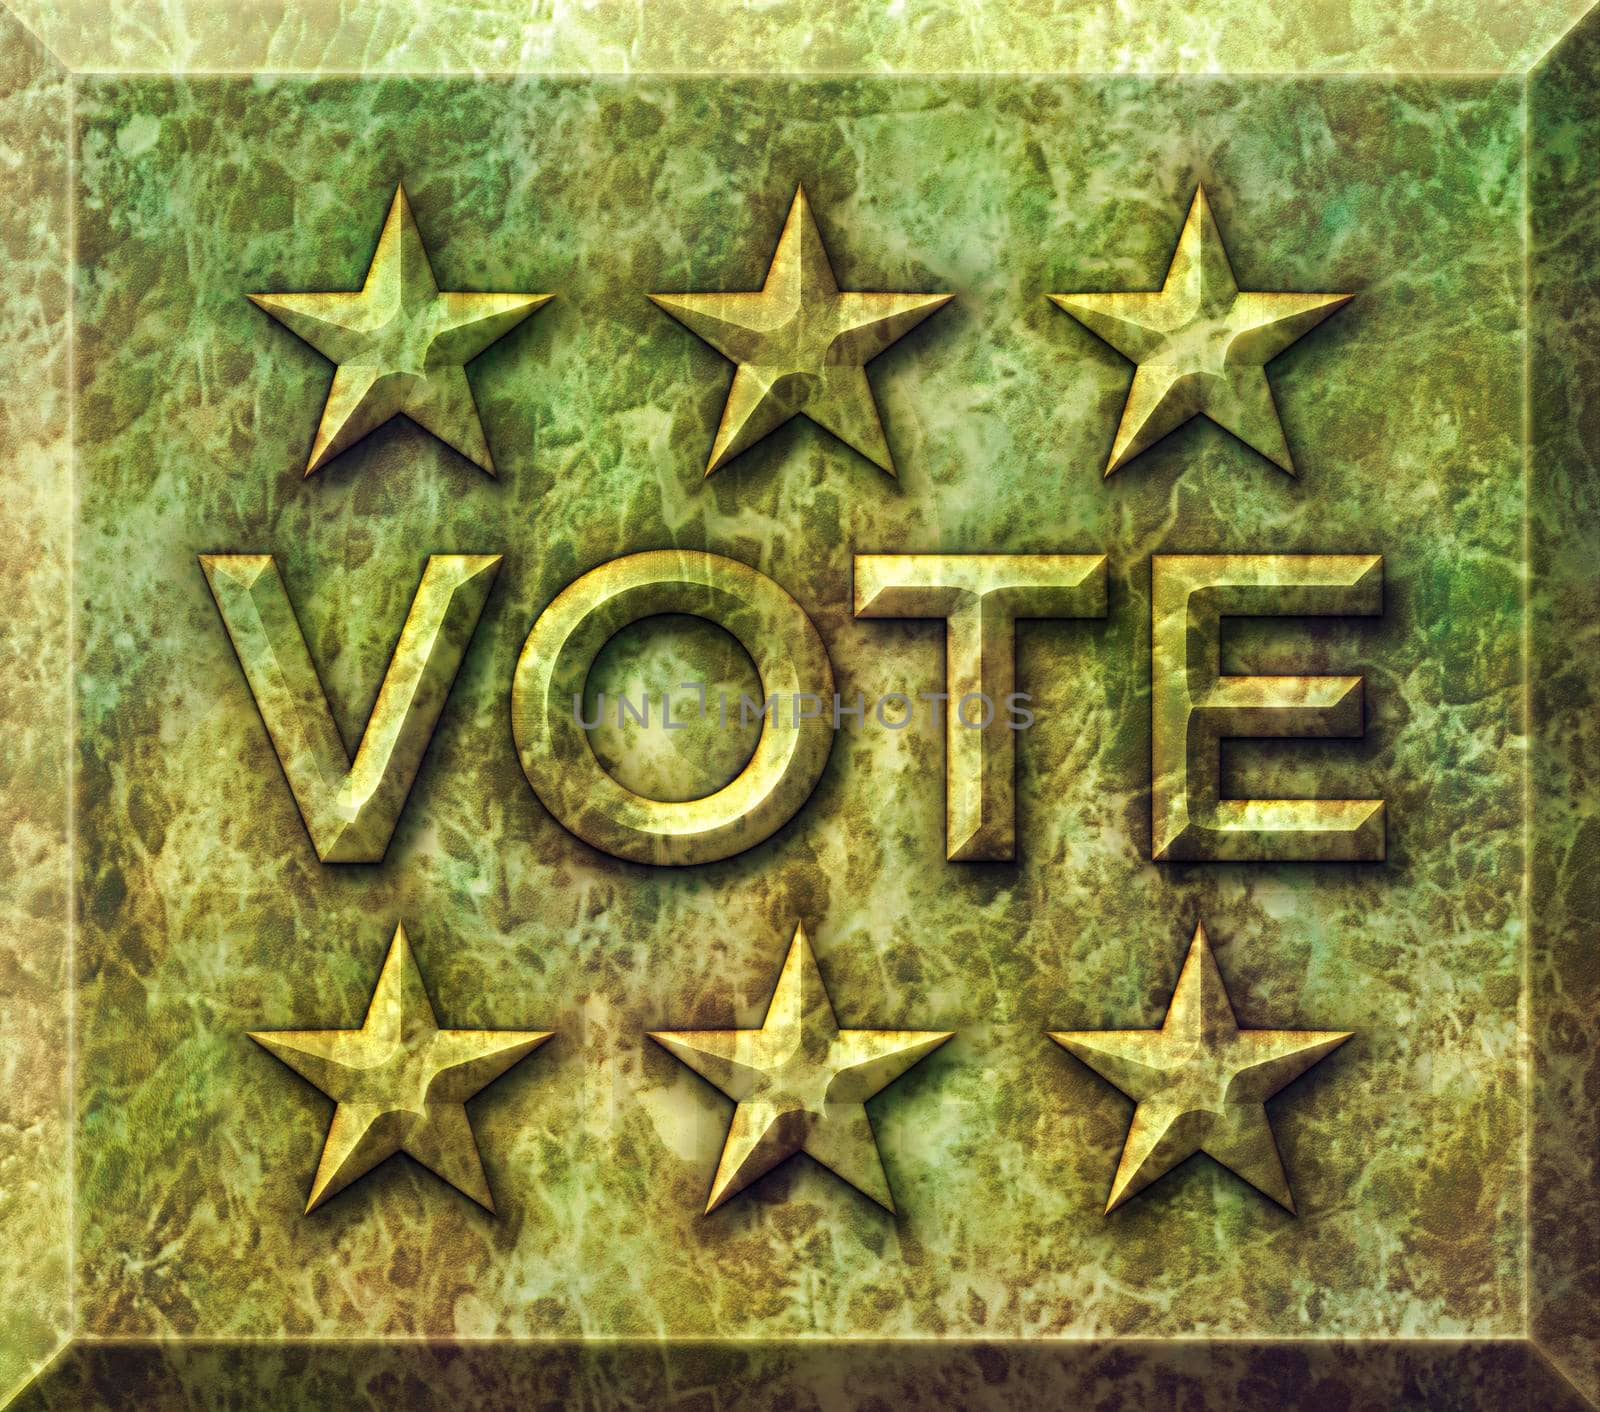 Carved VOTE and Stars on Marble Monument. 3D Illustration by jimlarkin